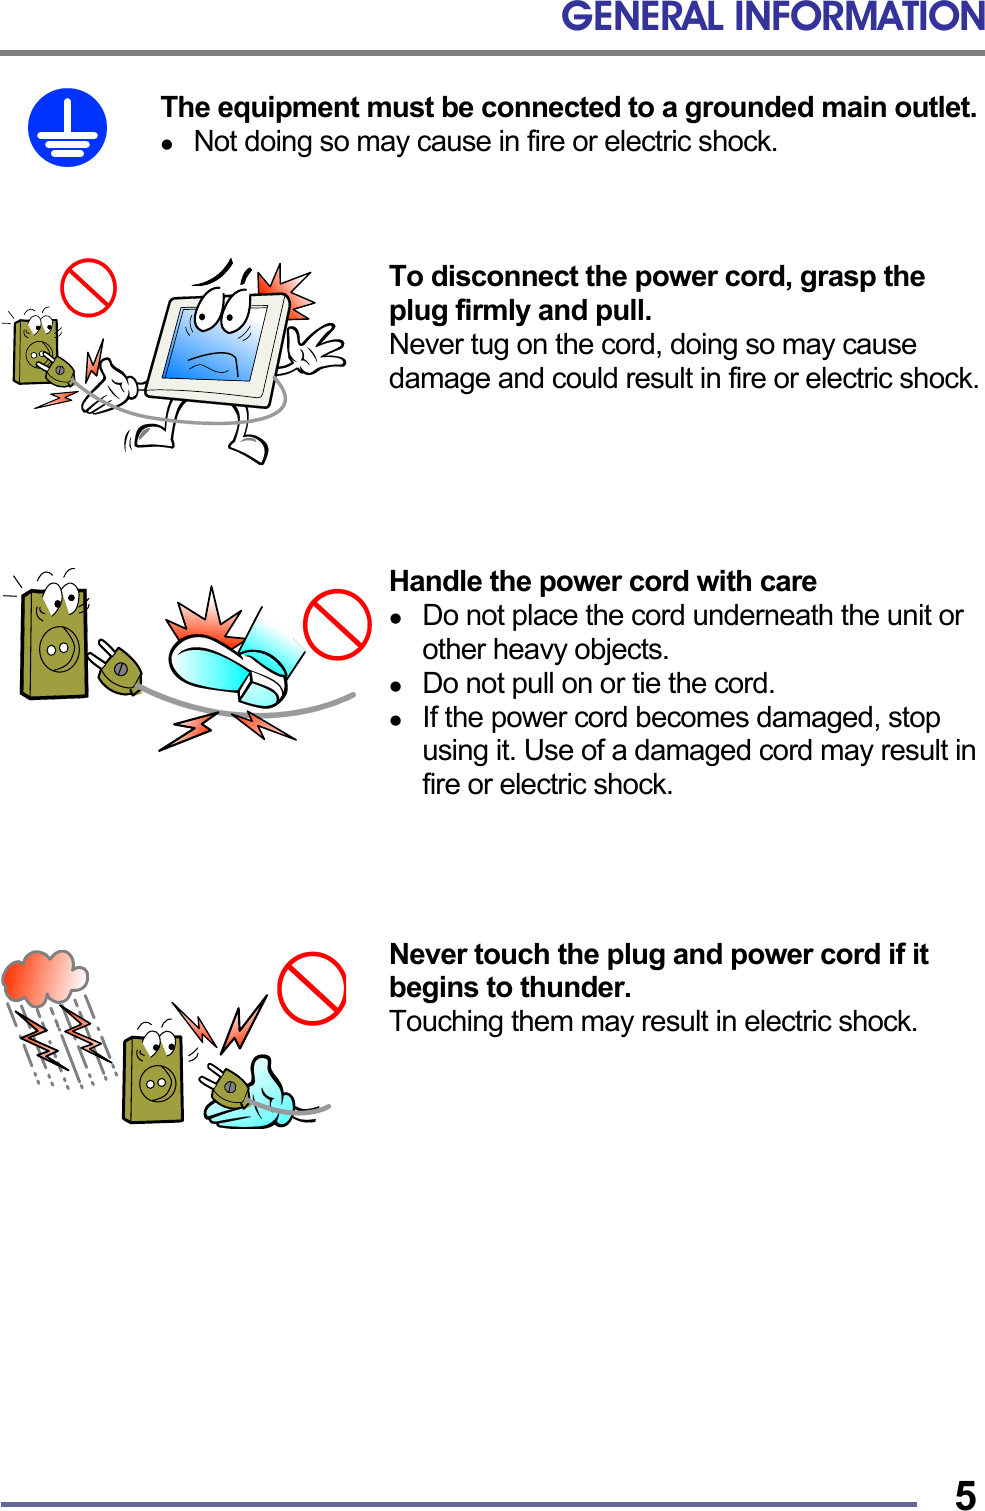 GENERAL INFORMATION   5The equipment must be connected to a grounded main outlet.   Not doing so may cause in fire or electric shock.    To disconnect the power cord, grasp the plug firmly and pull. Never tug on the cord, doing so may cause damage and could result in fire or electric shock.      Handle the power cord with care   Do not place the cord underneath the unit or other heavy objects.   Do not pull on or tie the cord.   If the power cord becomes damaged, stop using it. Use of a damaged cord may result in fire or electric shock.     Never touch the plug and power cord if it begins to thunder. Touching them may result in electric shock.             